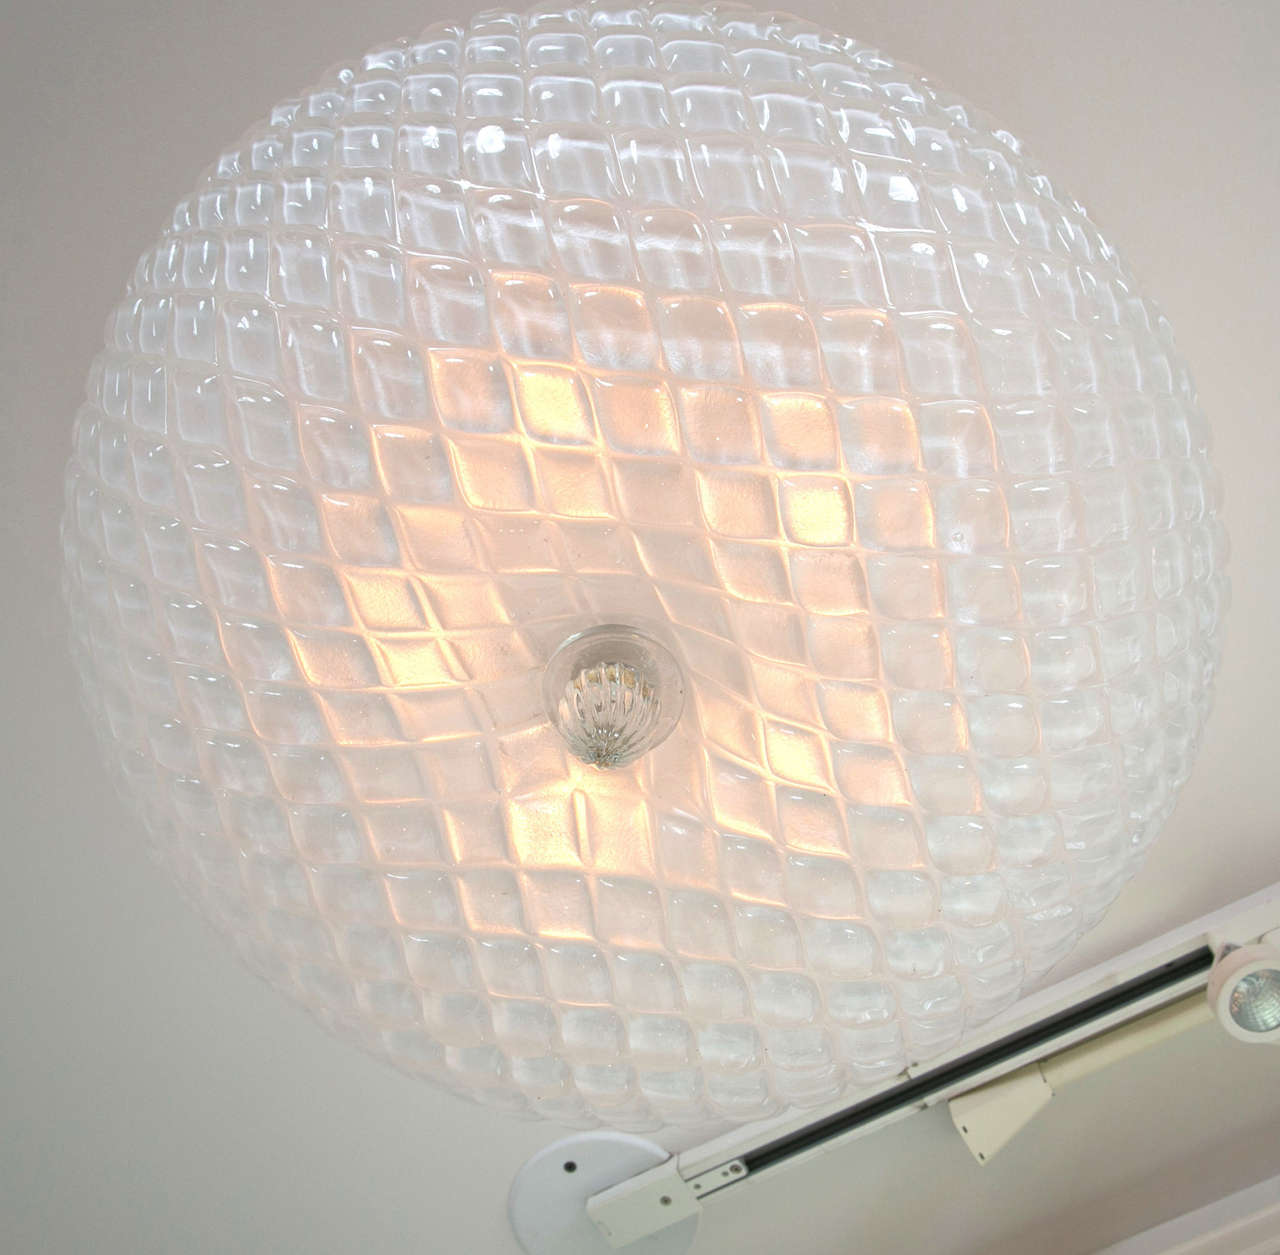 Shimmery Murano Ceiling Fixture or Pendant In Excellent Condition For Sale In Westport, CT